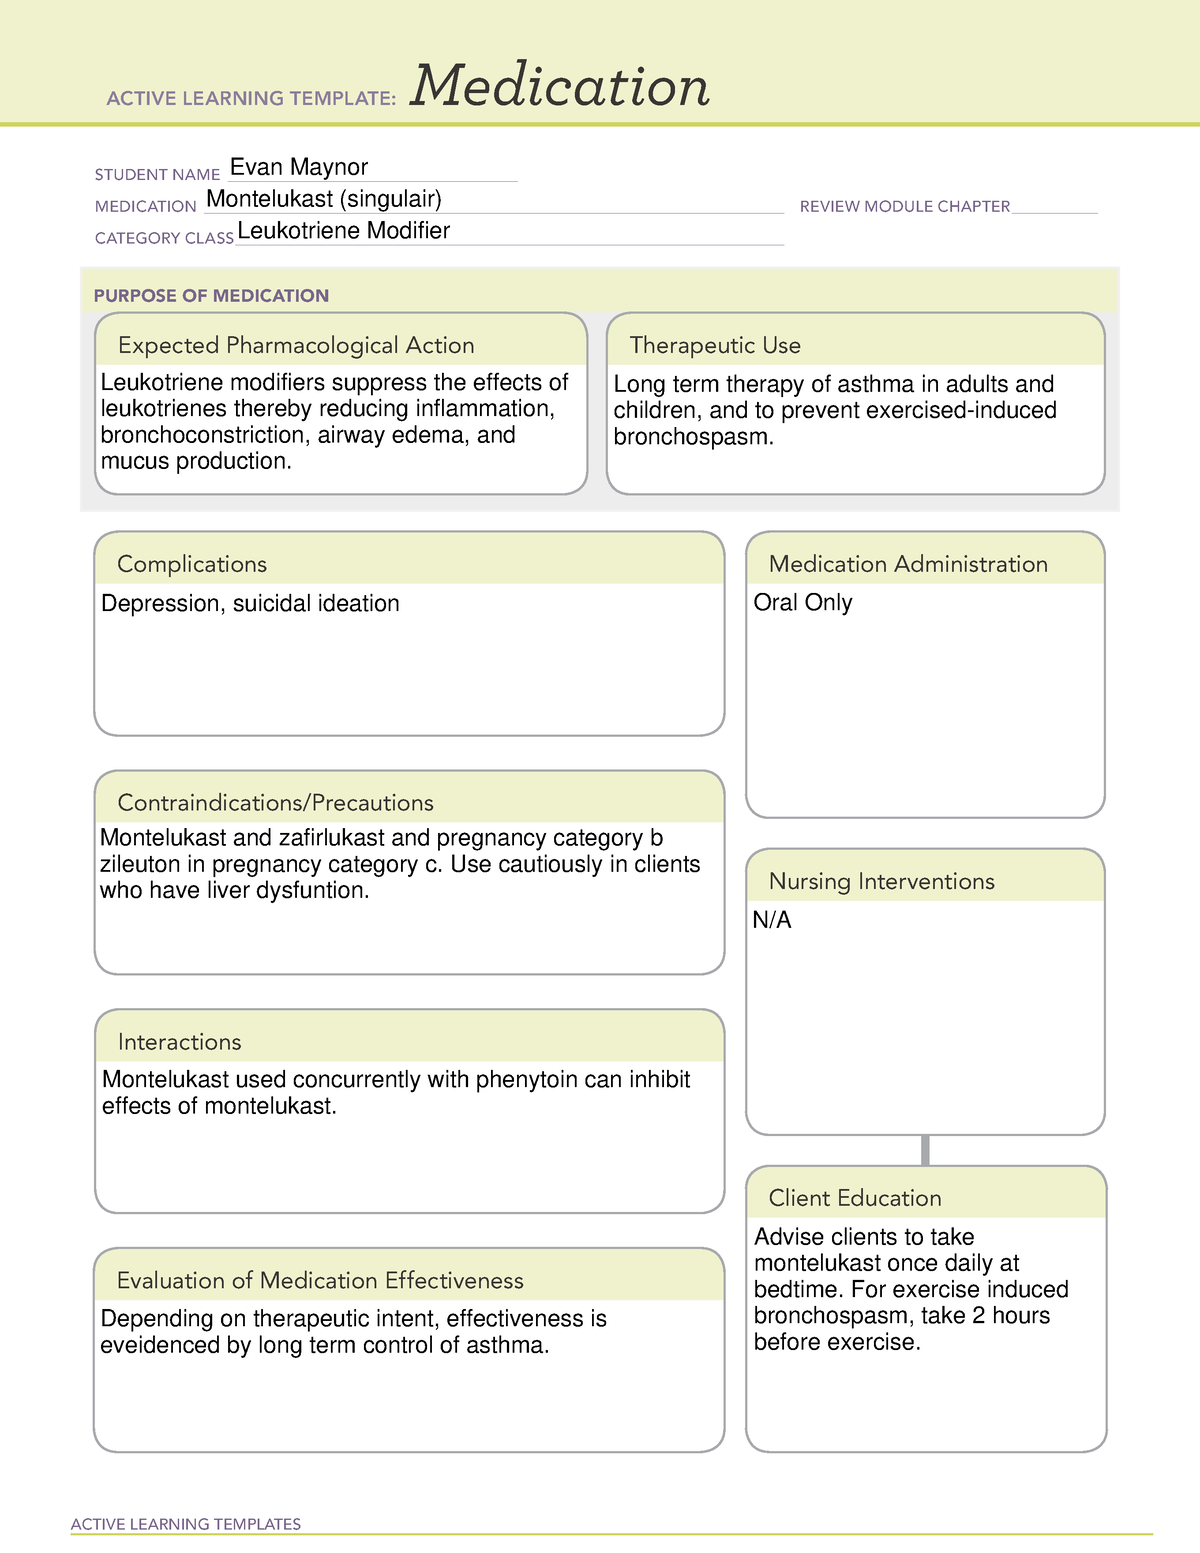 Montelukast Med Sheet ACTIVE LEARNING TEMPLATES Medication STUDENT